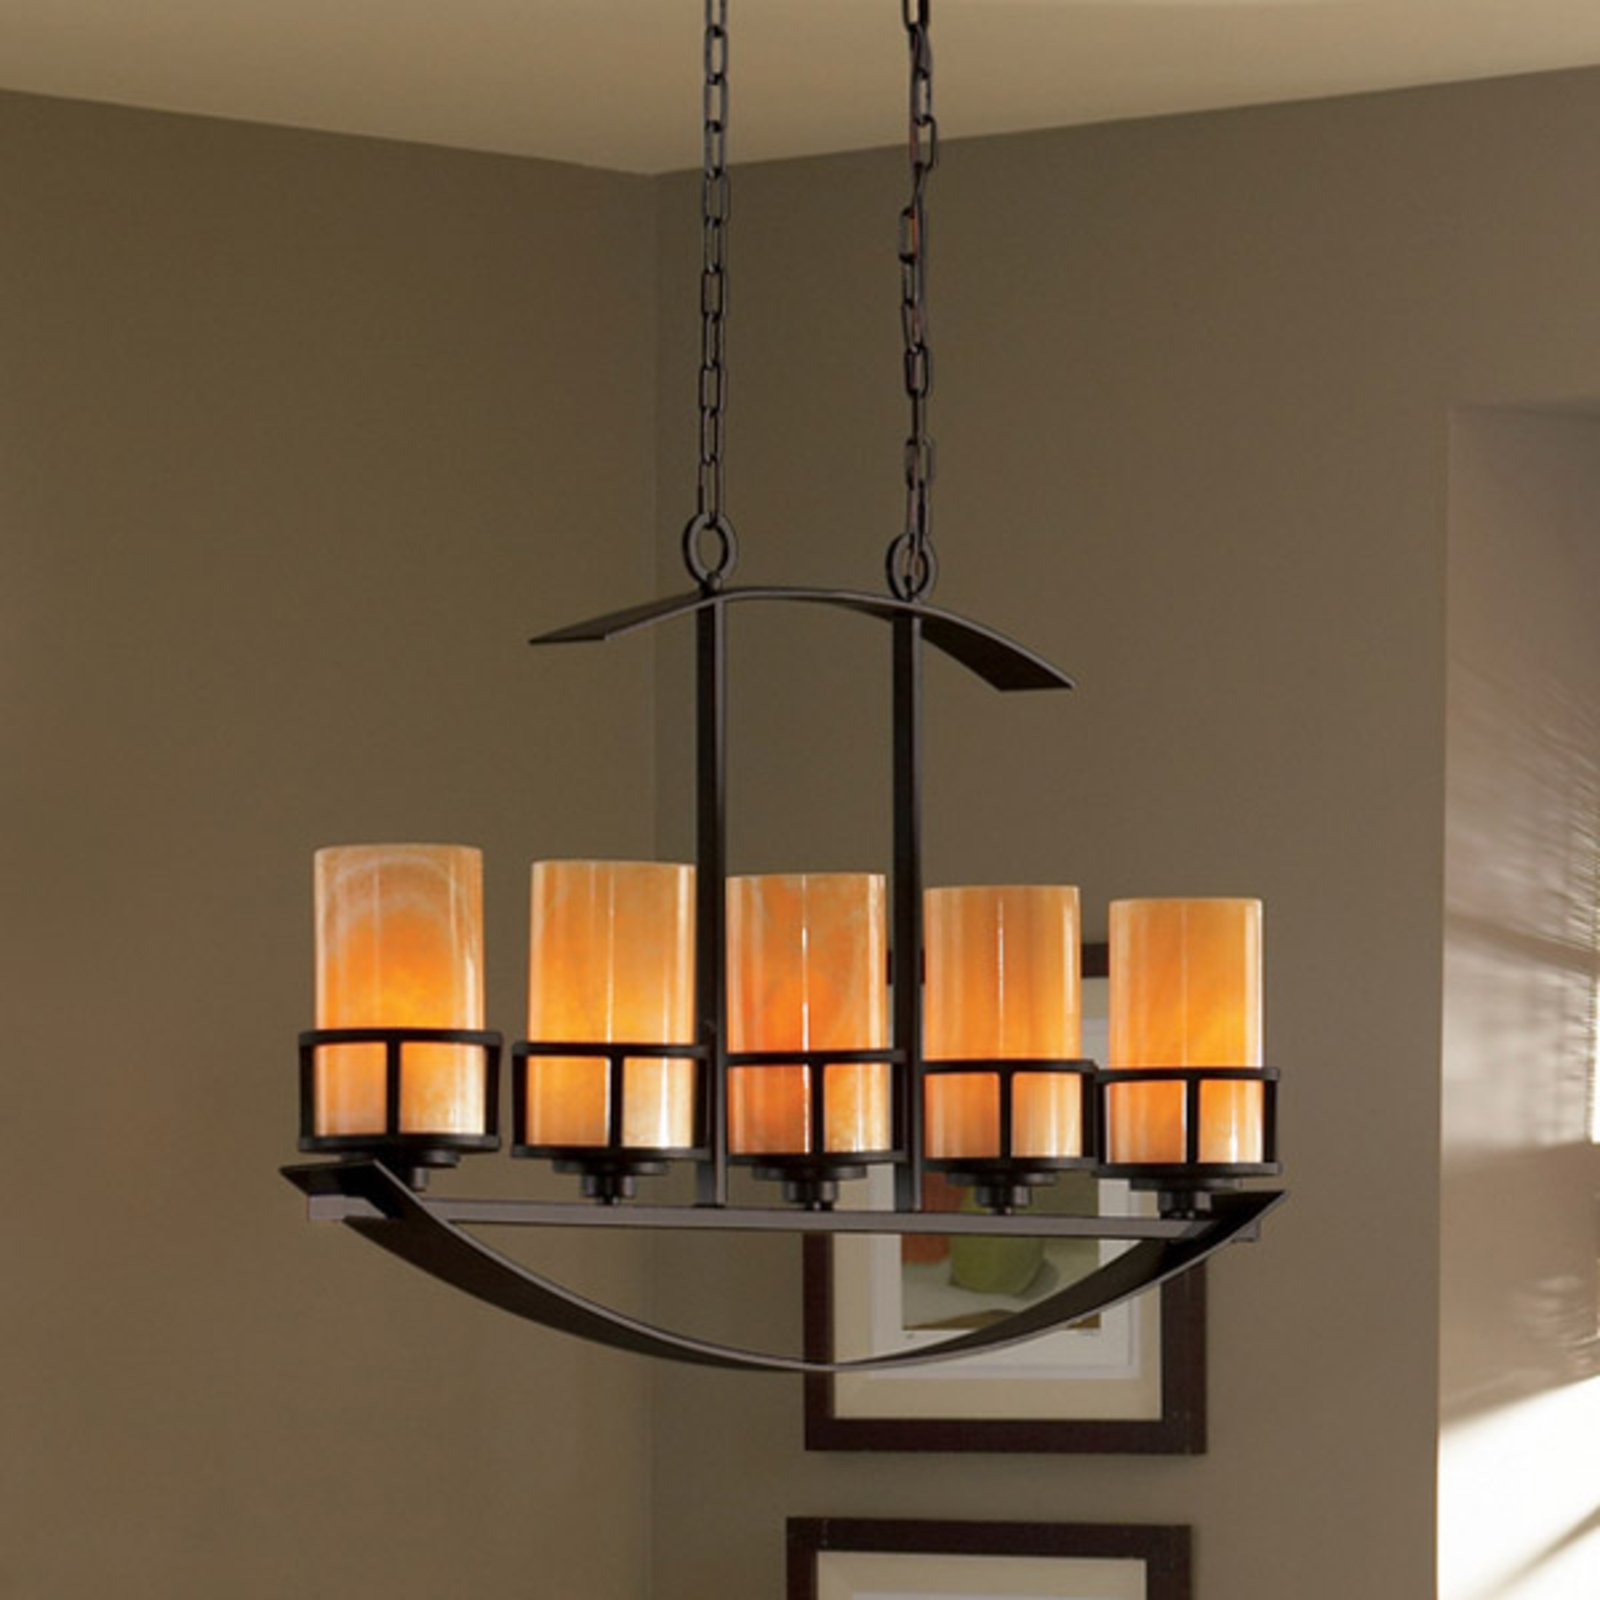 Long pendant light Kyle with 5 onyx lampshades